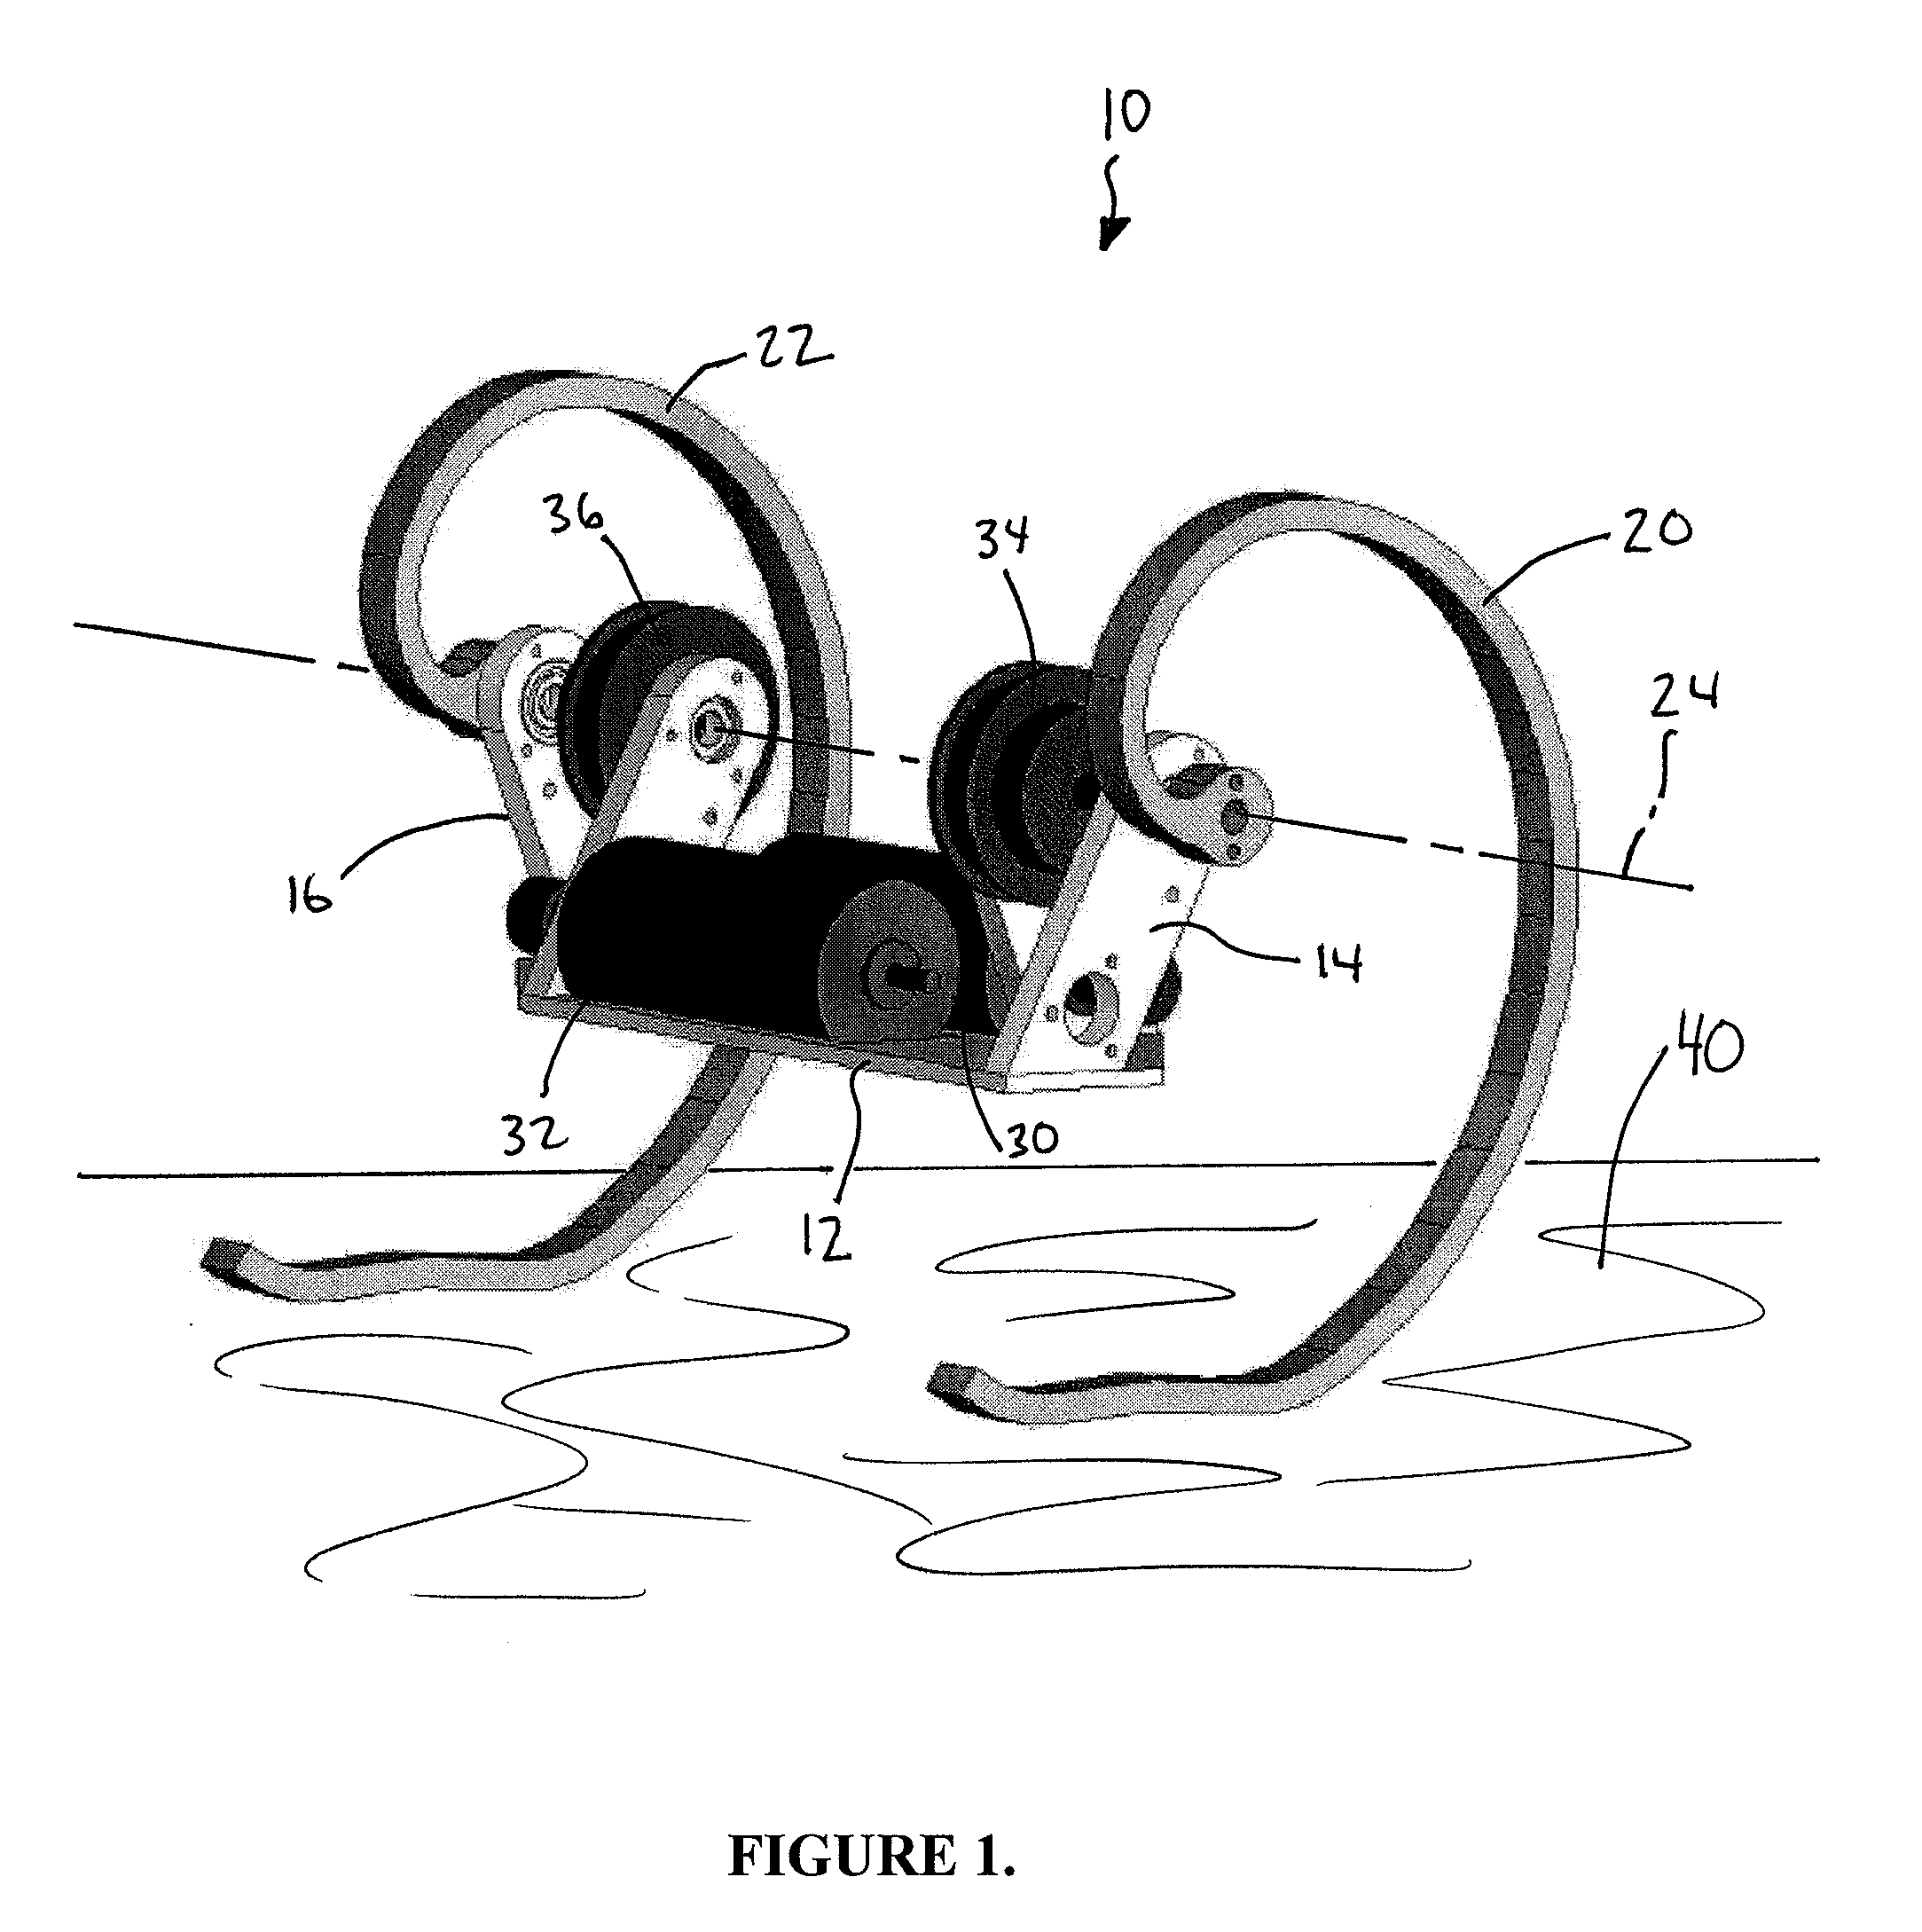 Statically stable biped robotic mechanism and method of actuating